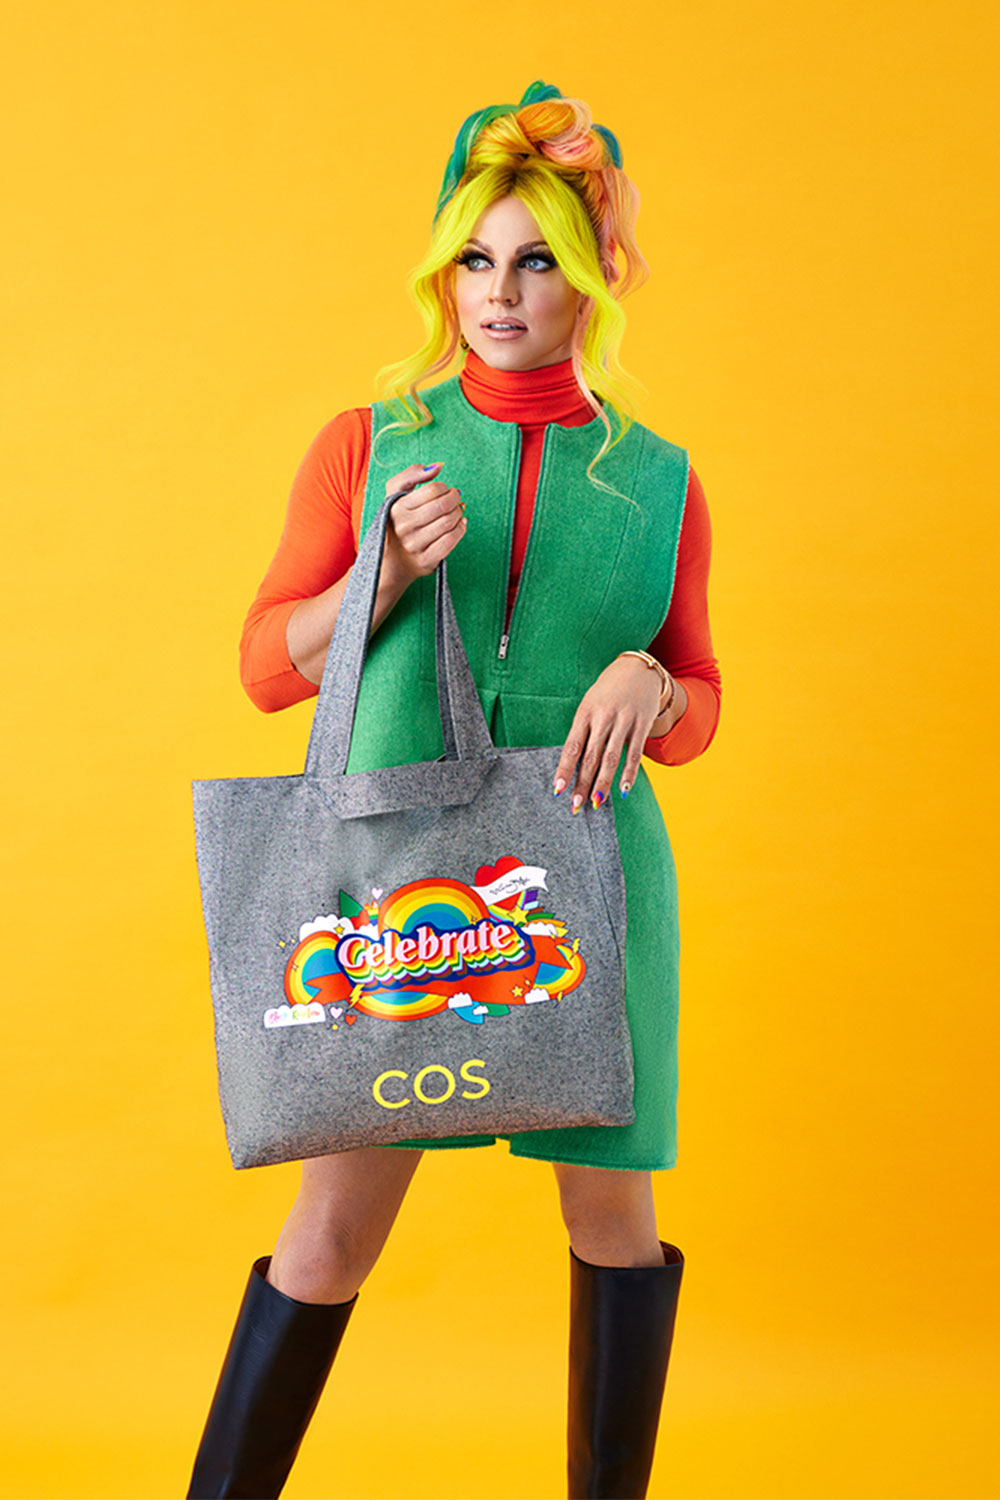 COS Courtney Act tote